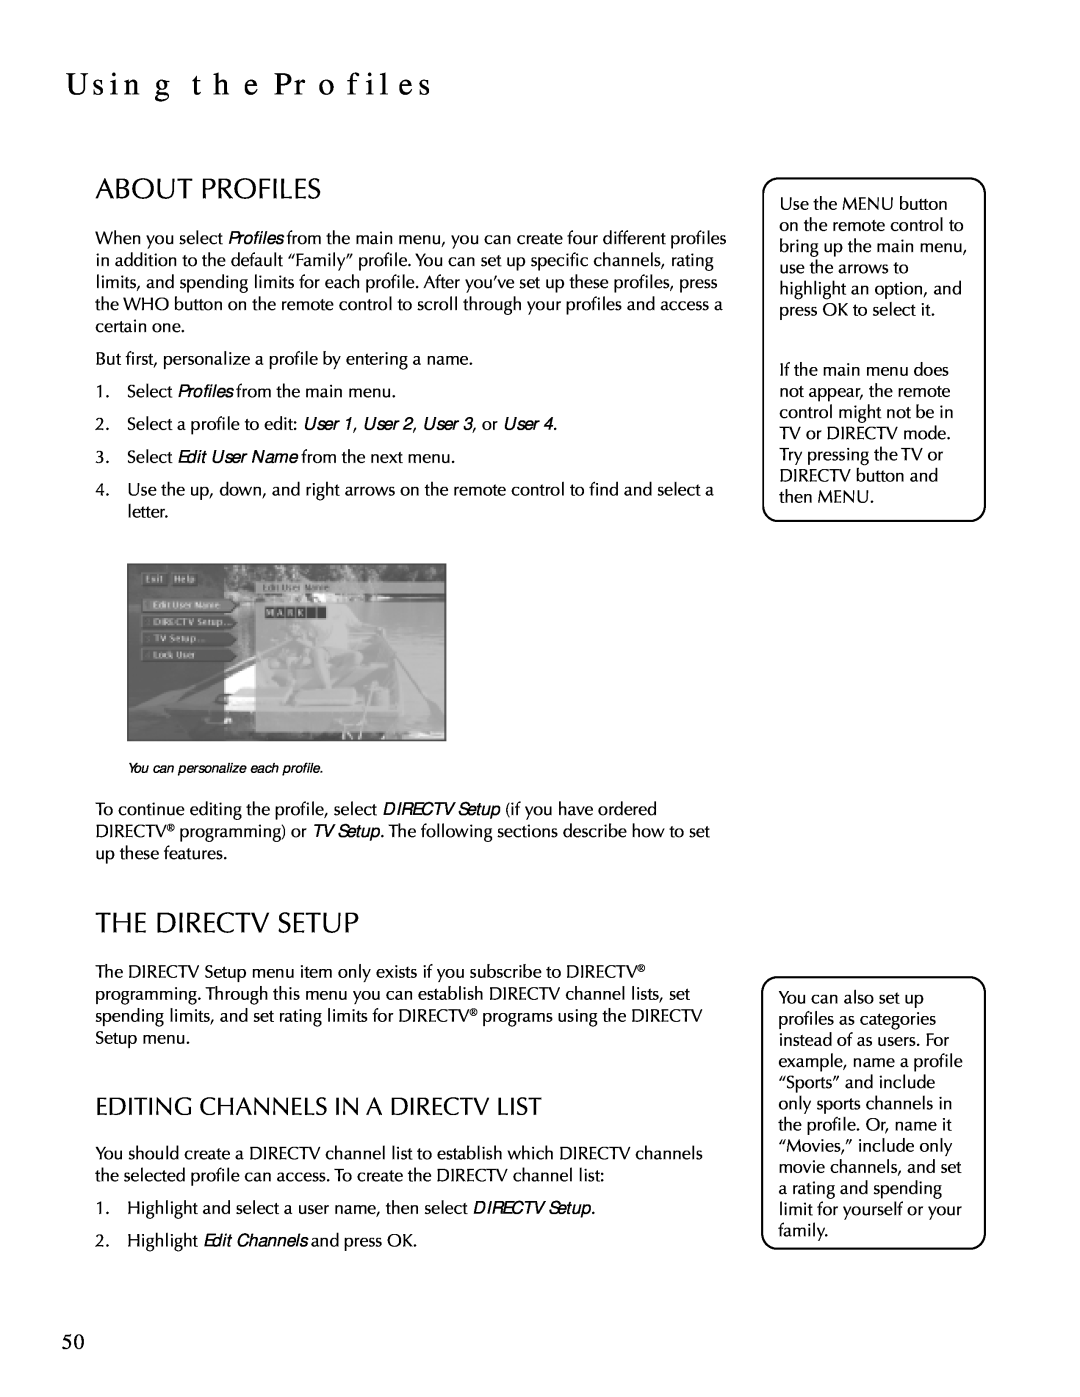 DirecTV HDTV user manual Using The Profiles, About Profiles, The Directv Setup, Editing Channels In A Directv List 